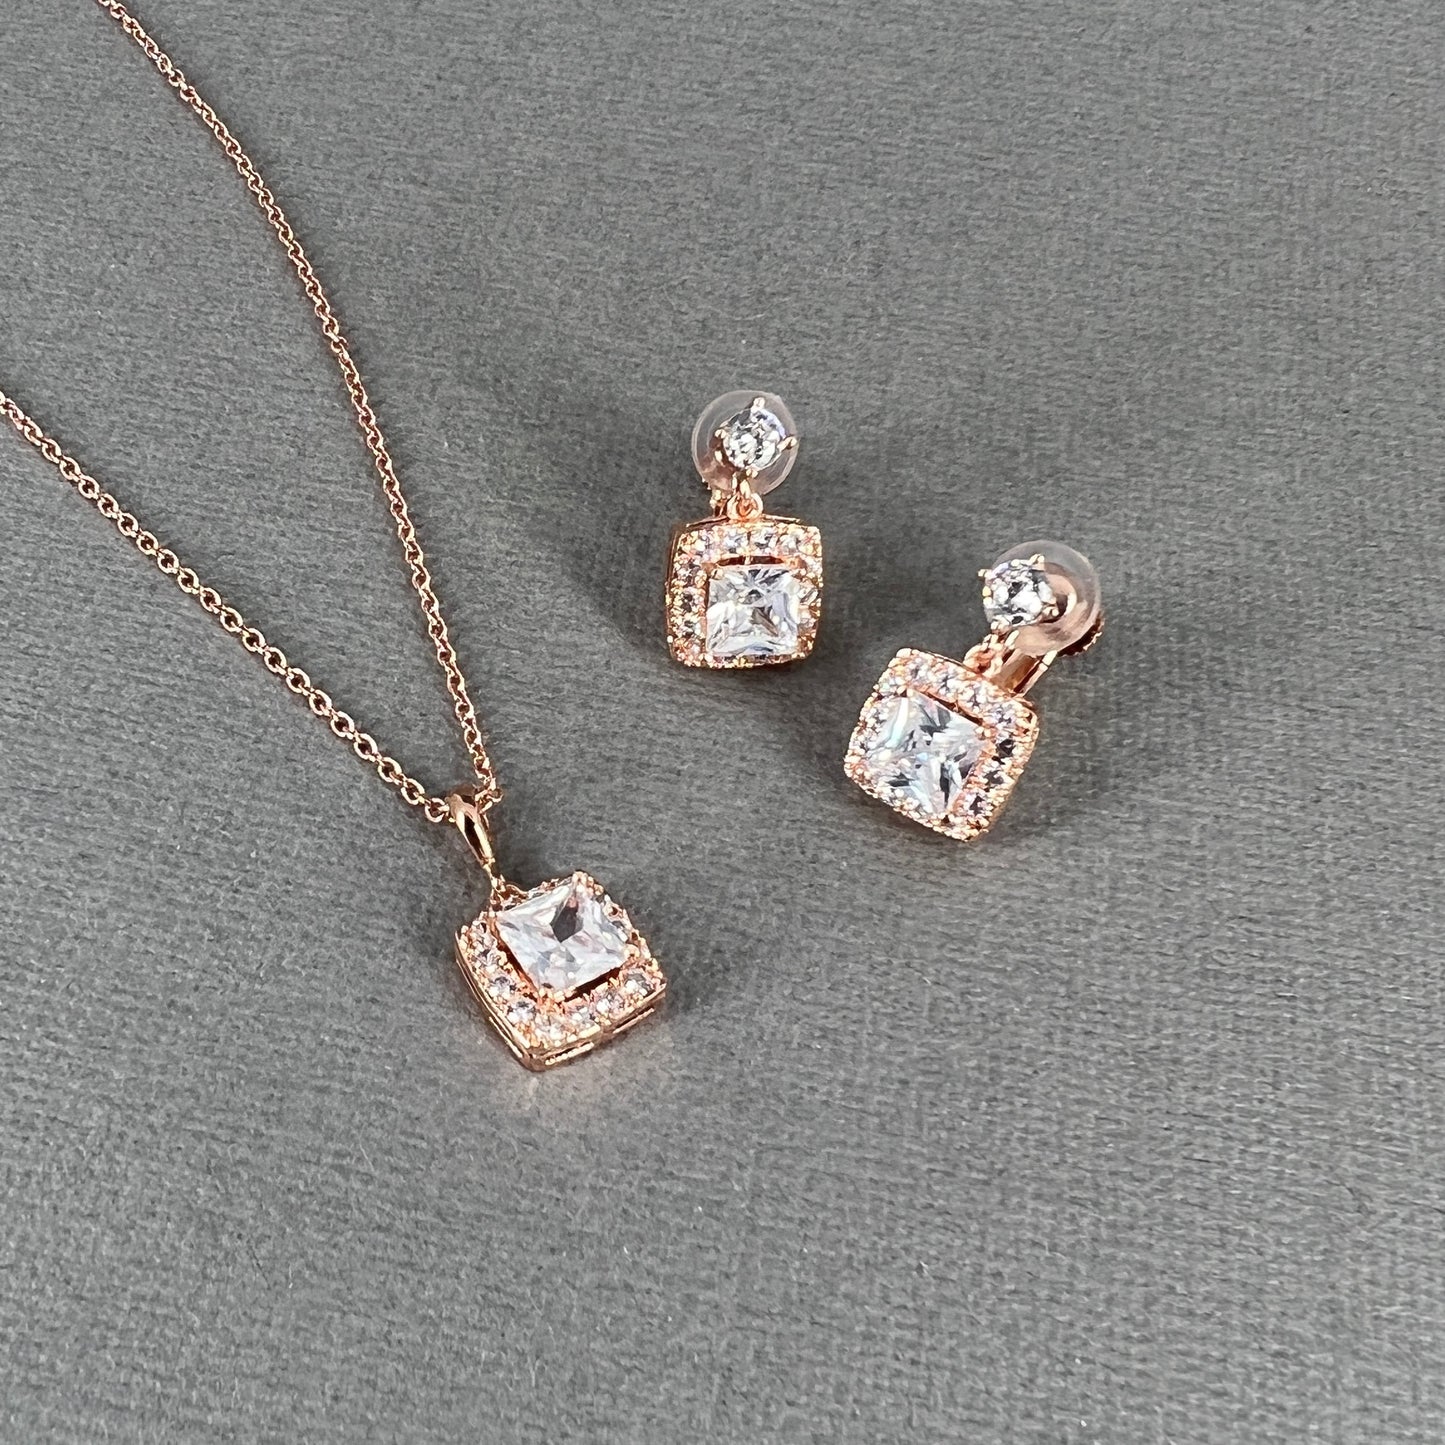 LcKenna 2pcs CZ Square Necklace and Clip-on Earrings Set